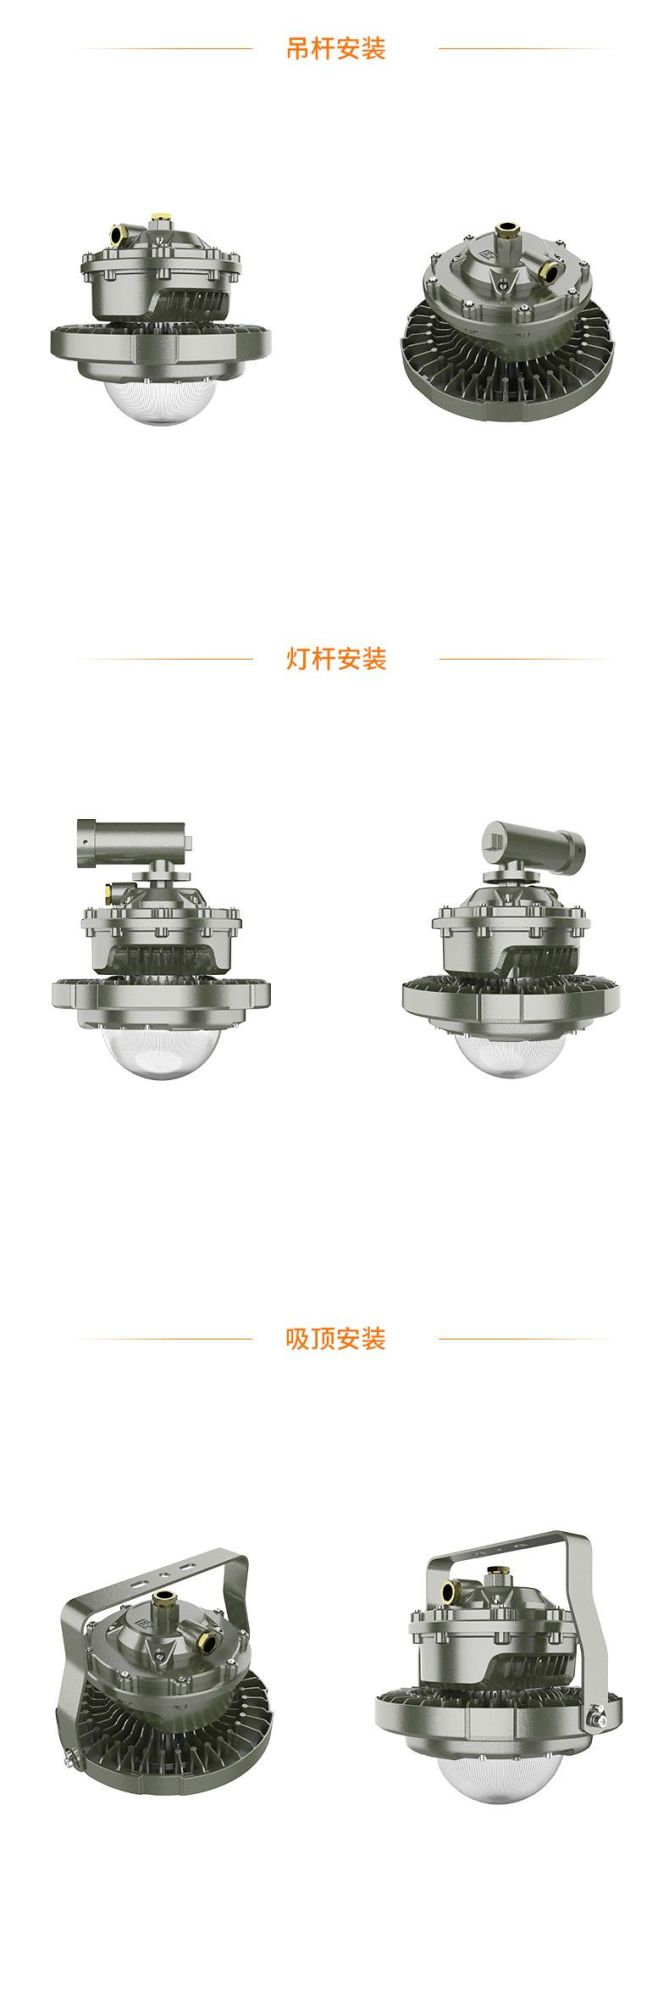 Atex Lighting 100-150W Explosion Proof Light Chemical Industry